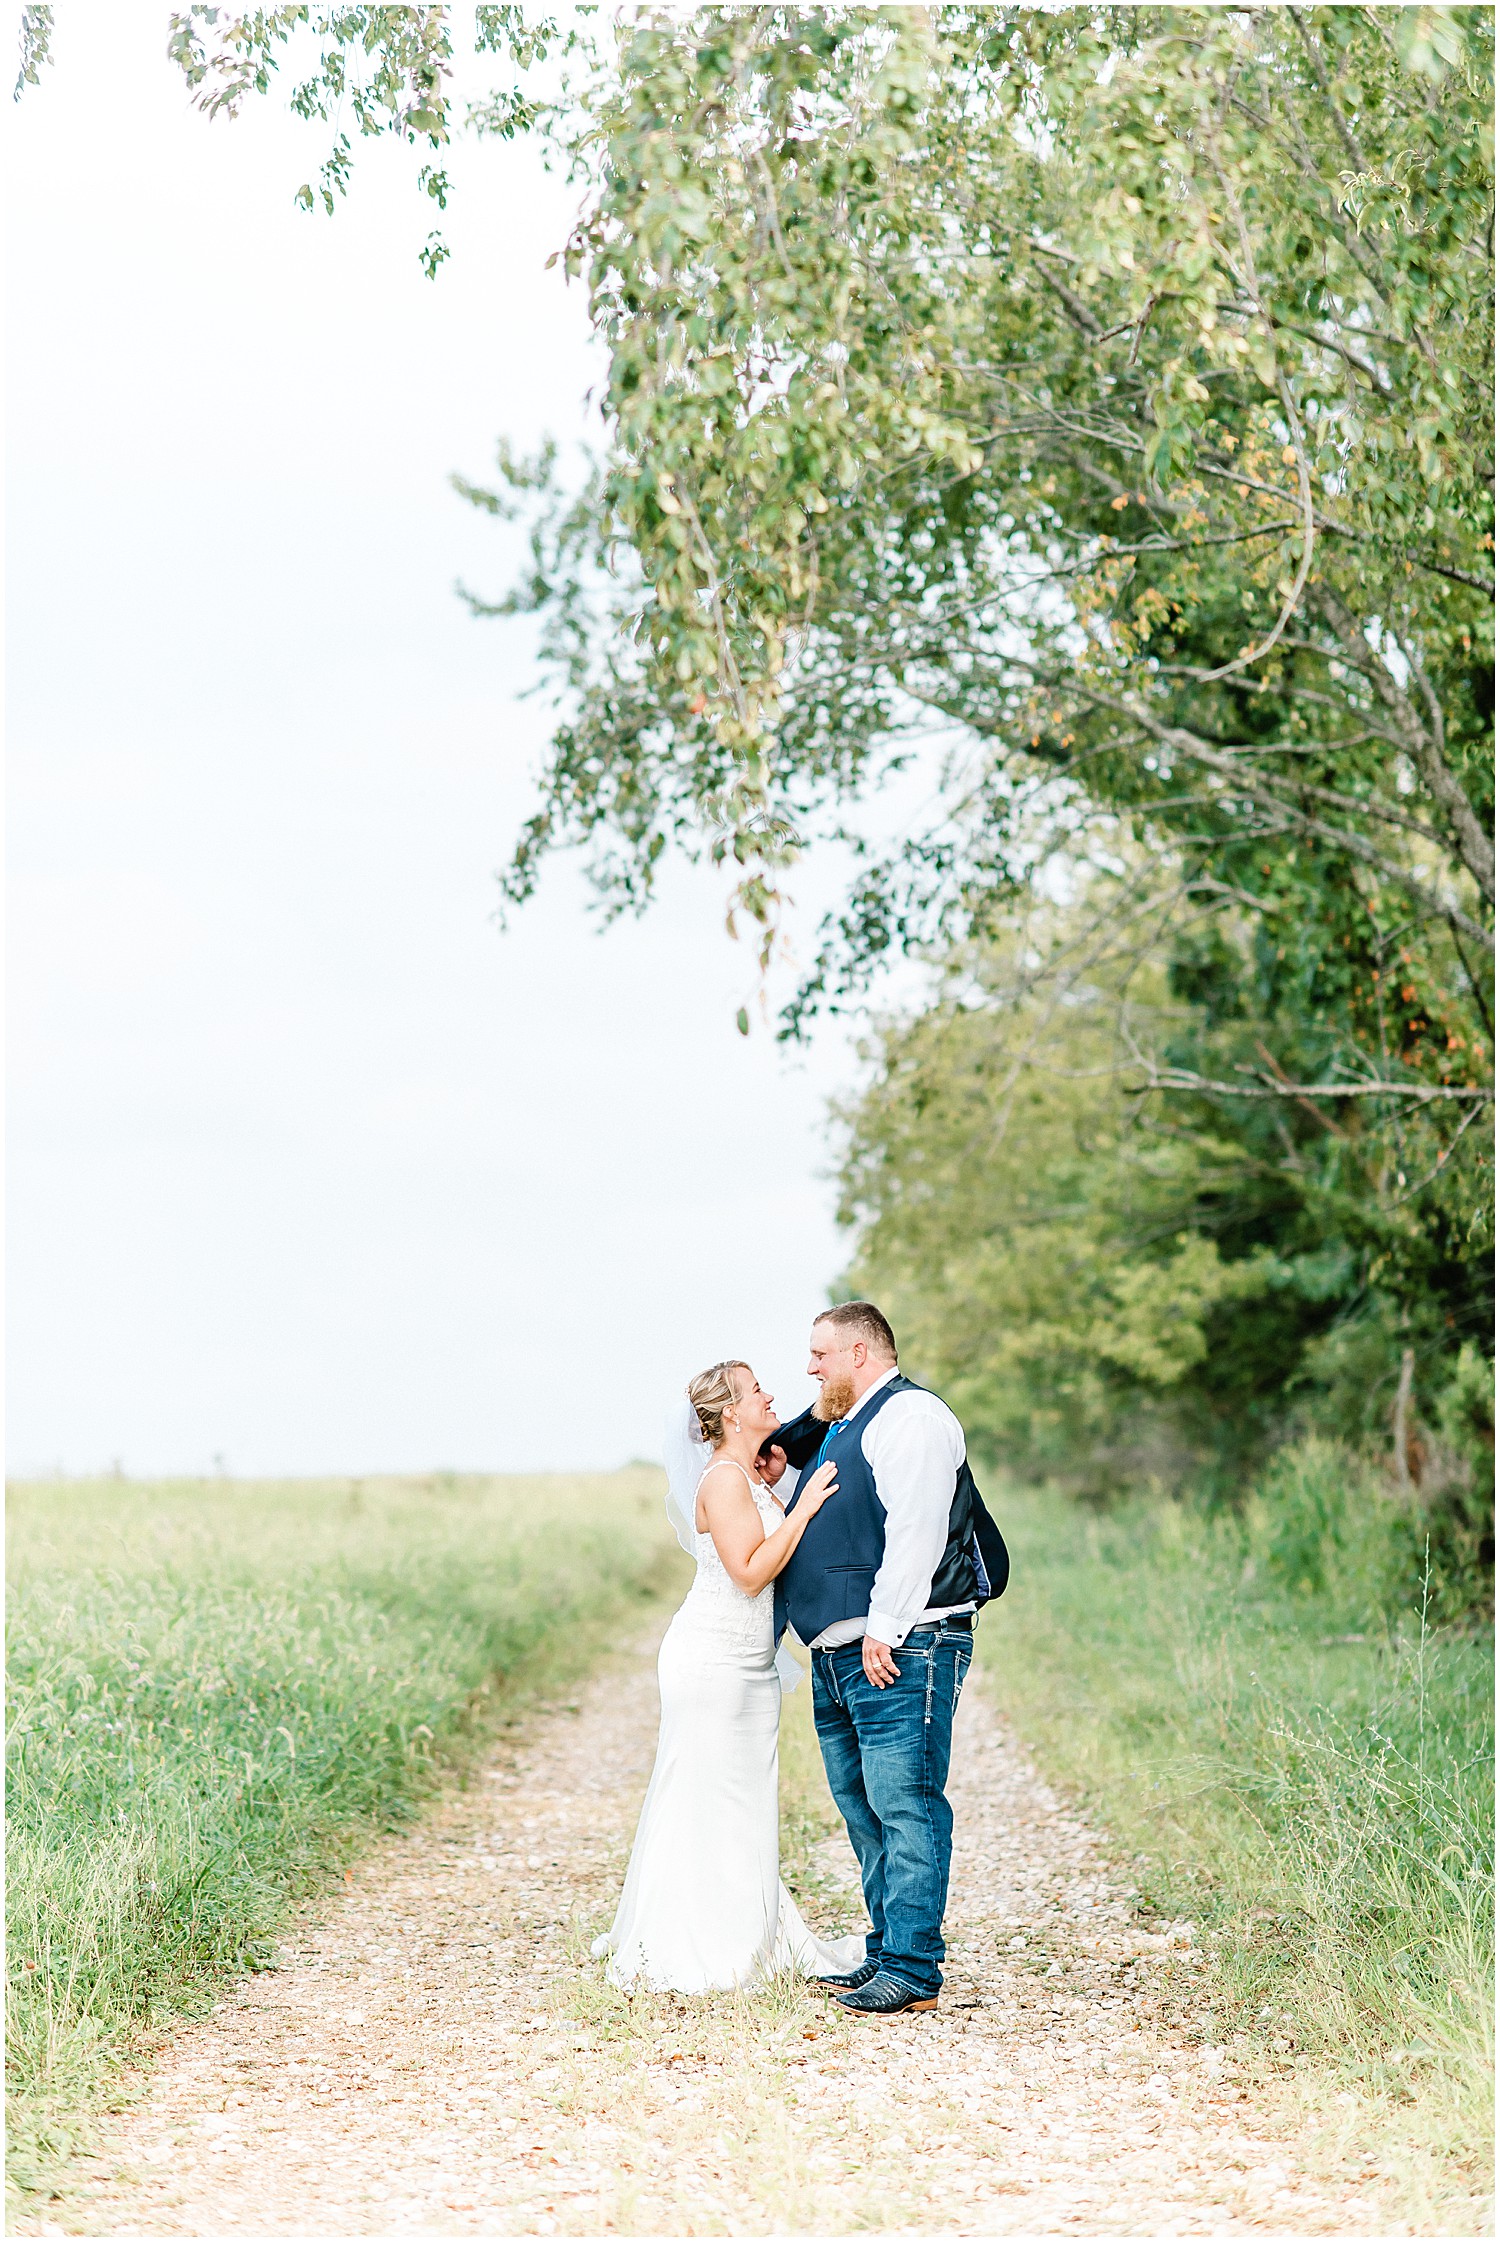 bride and groom holding each other on path during wedding day portraits